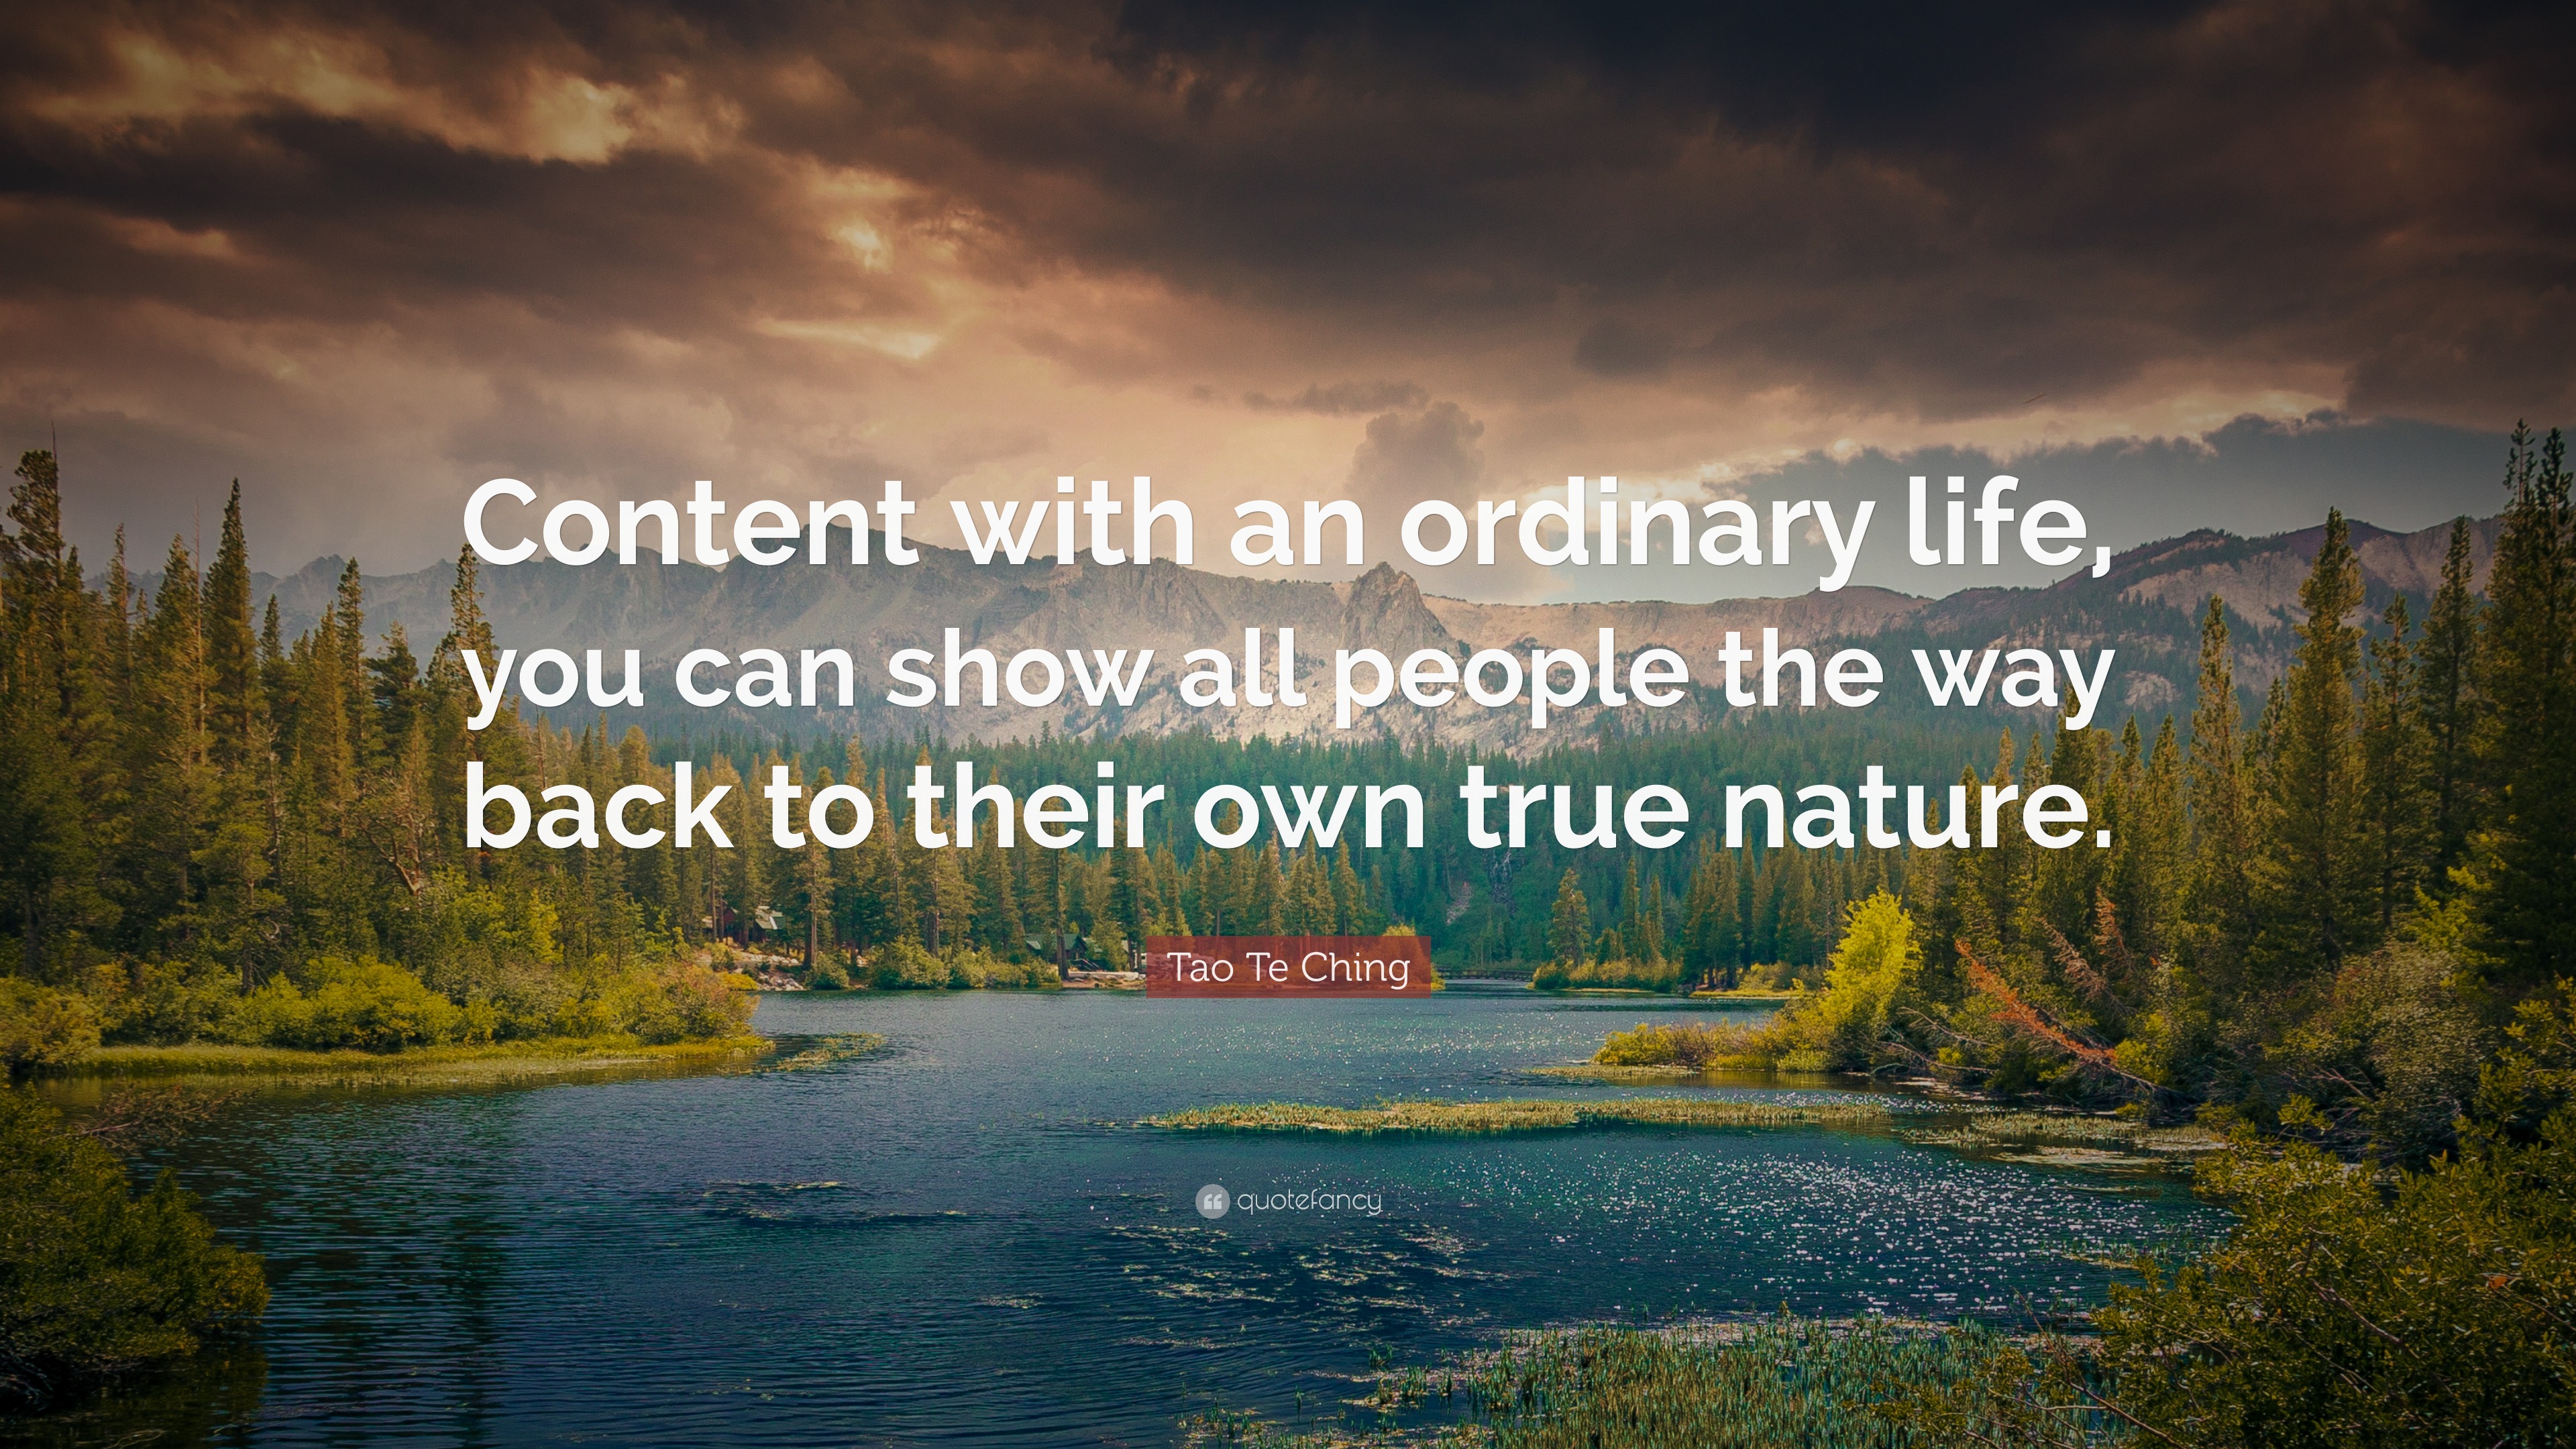 Tao Te Ching Quote: “Content with an ordinary life, you can show